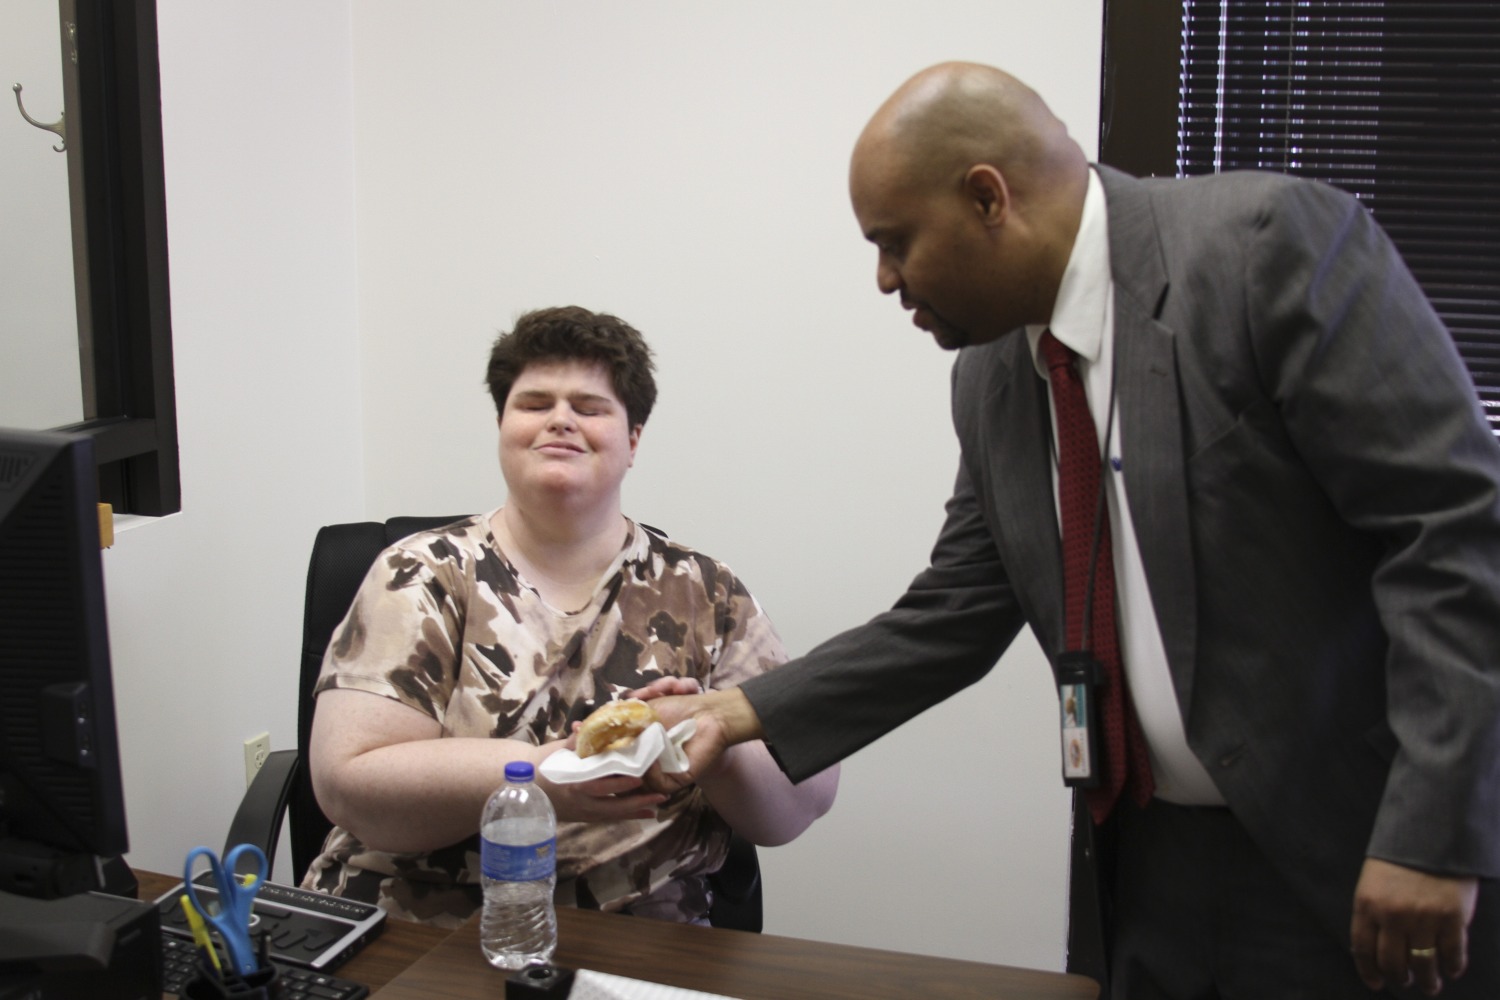 Director Doyle giving a donut to a staff member in the Tallahassee District Office